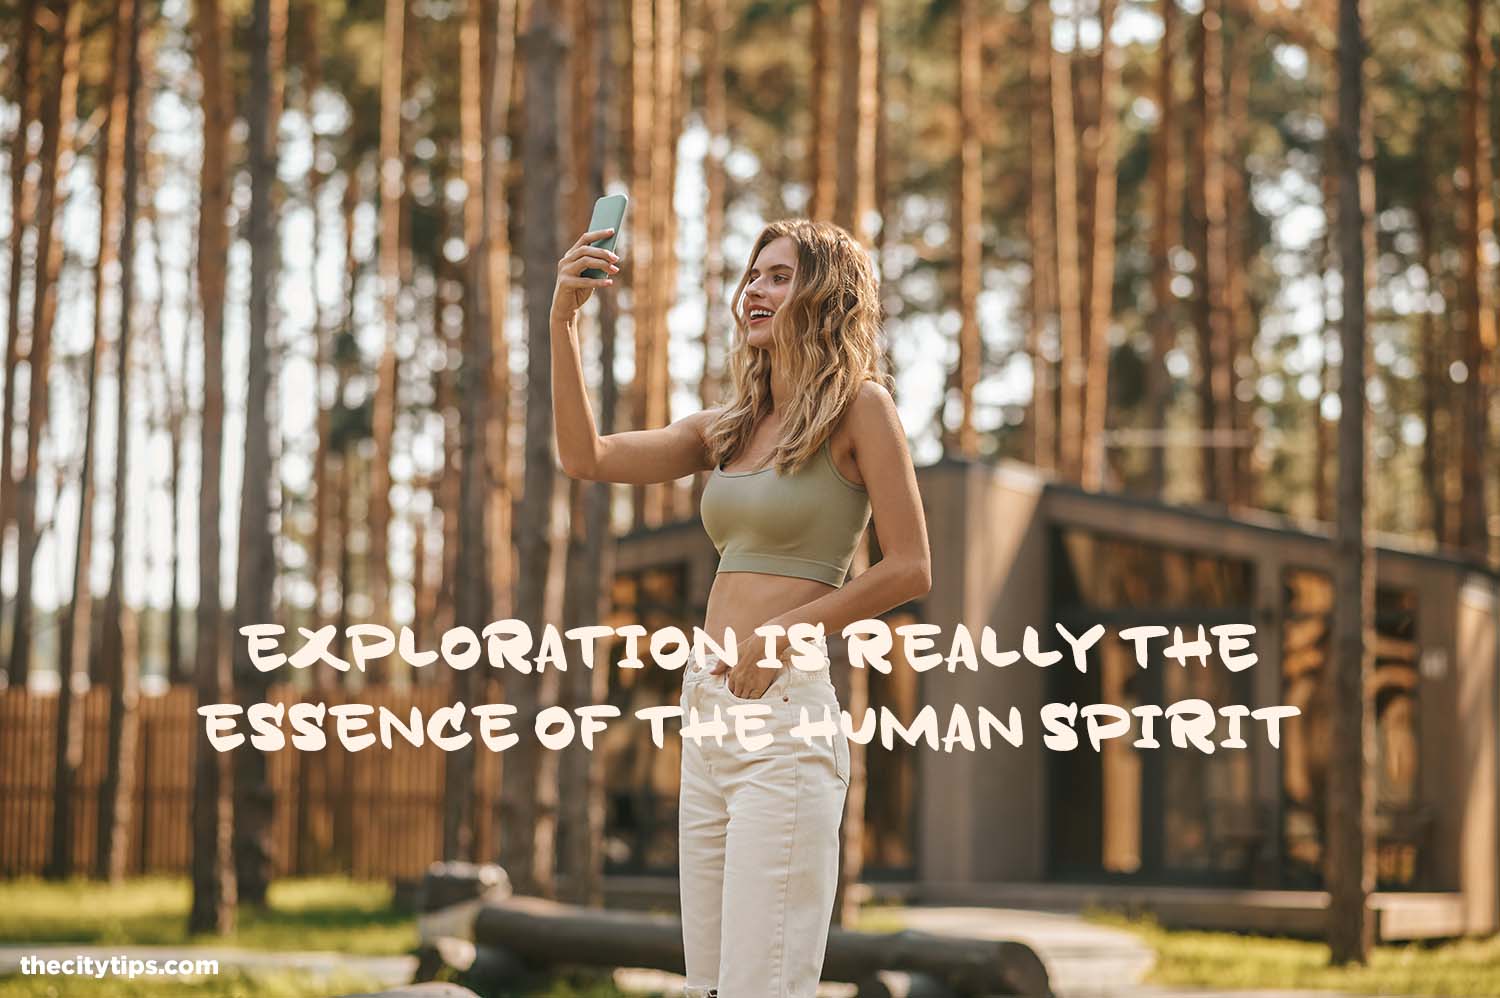 "Exploration is really the essence of the human spirit." by Frank Borman